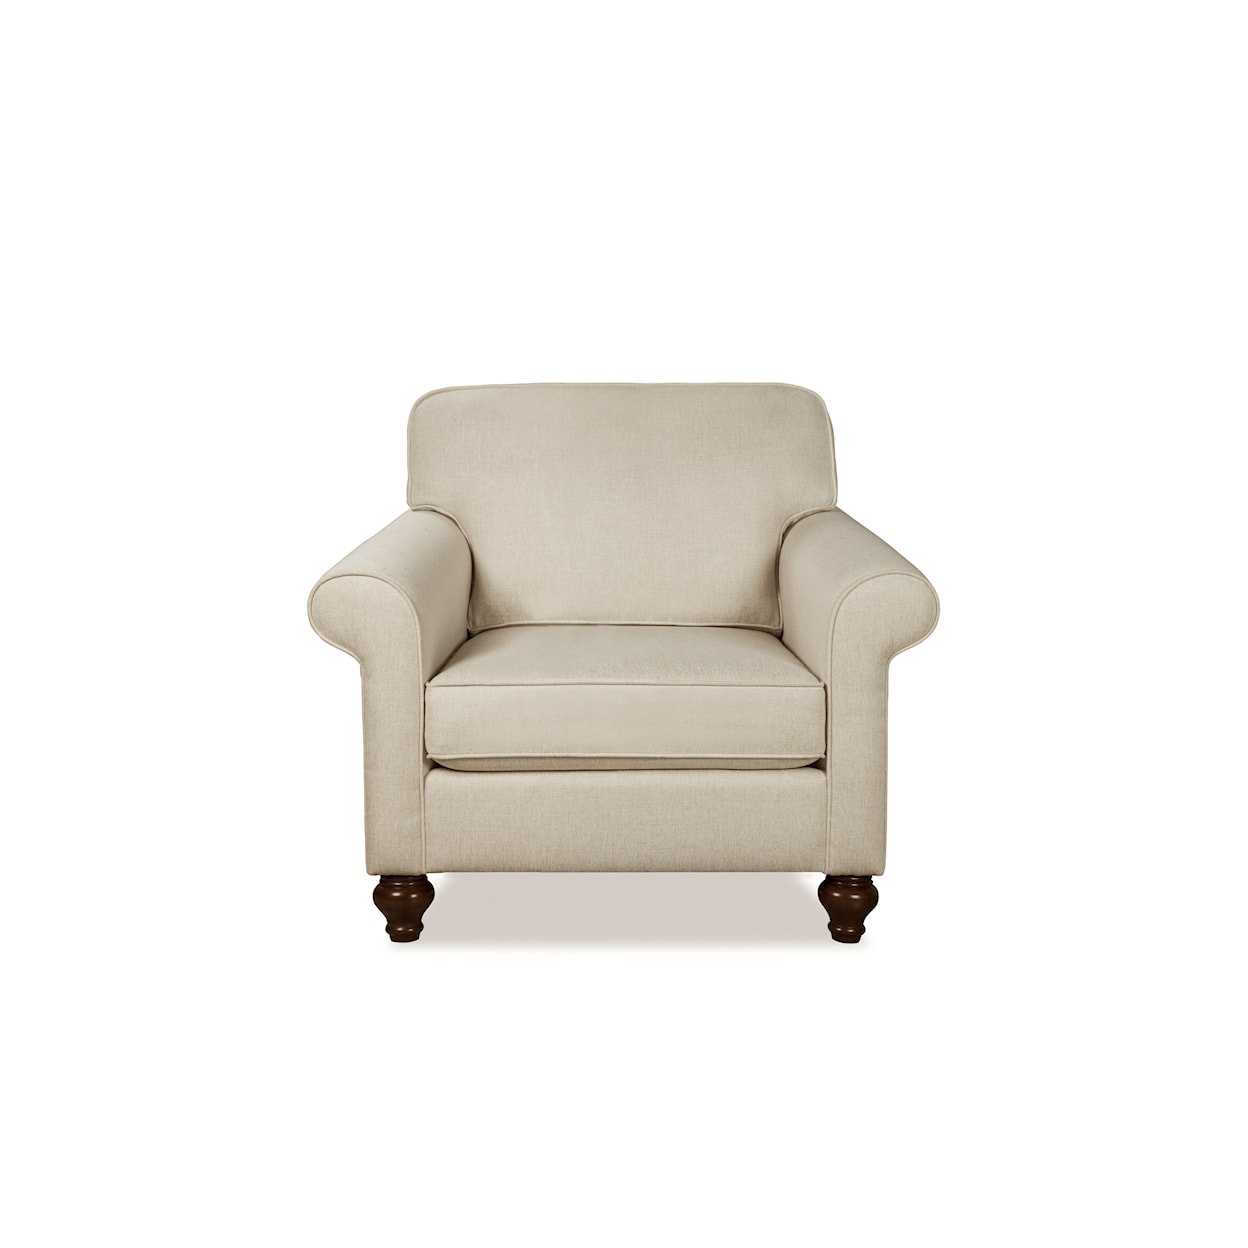 Craftmaster Carole Accent Chair